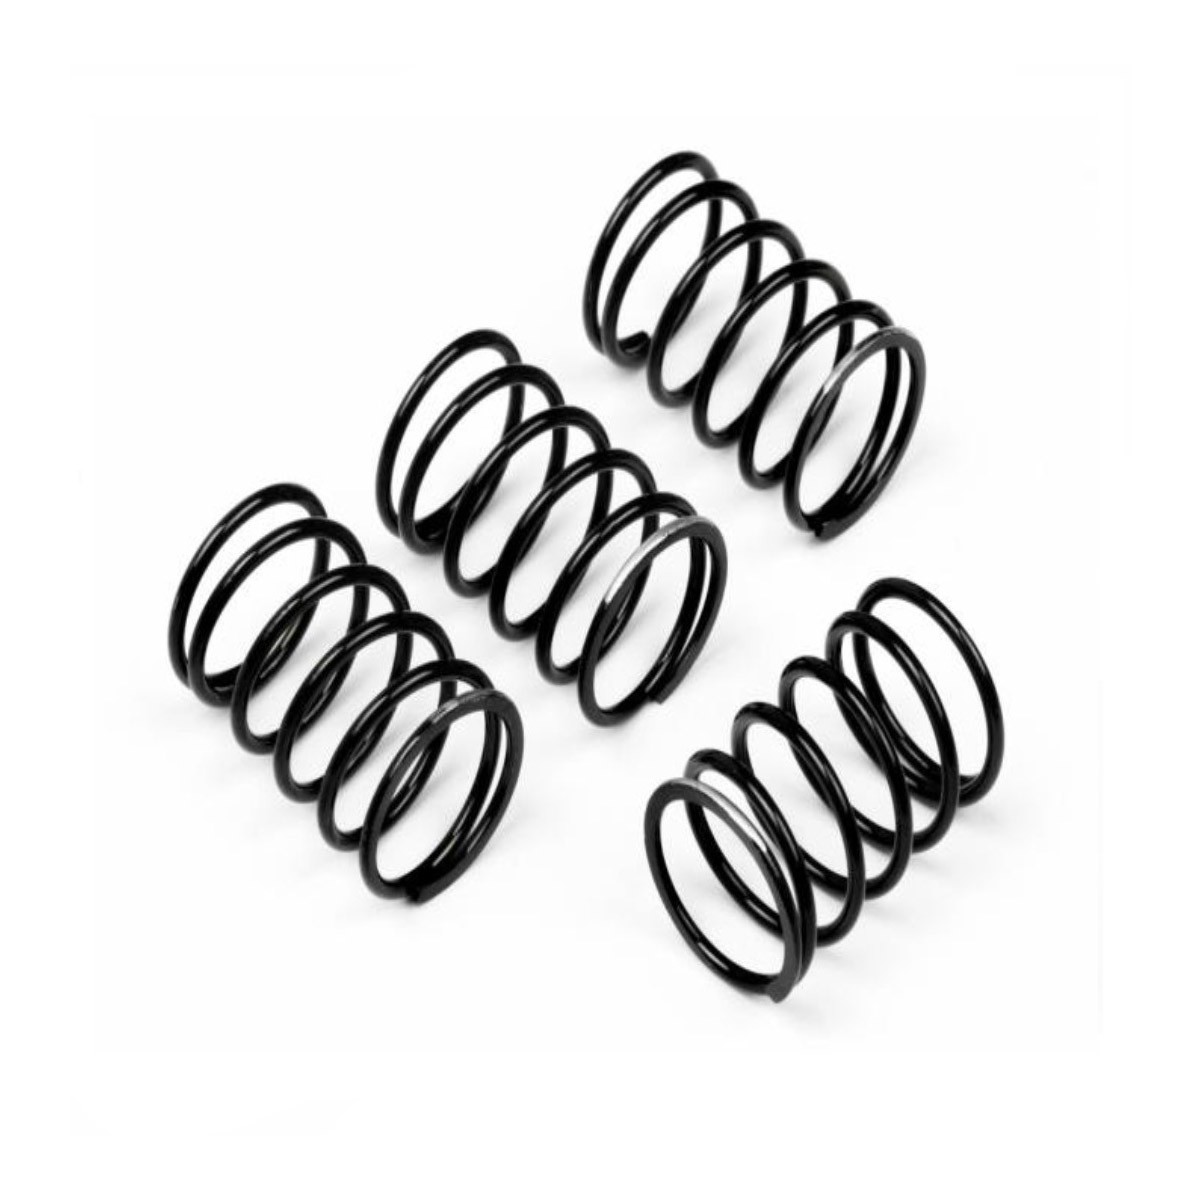 Lowering Springs for Seat Leon Eibach Pro Kit (2019-2022) Image 1